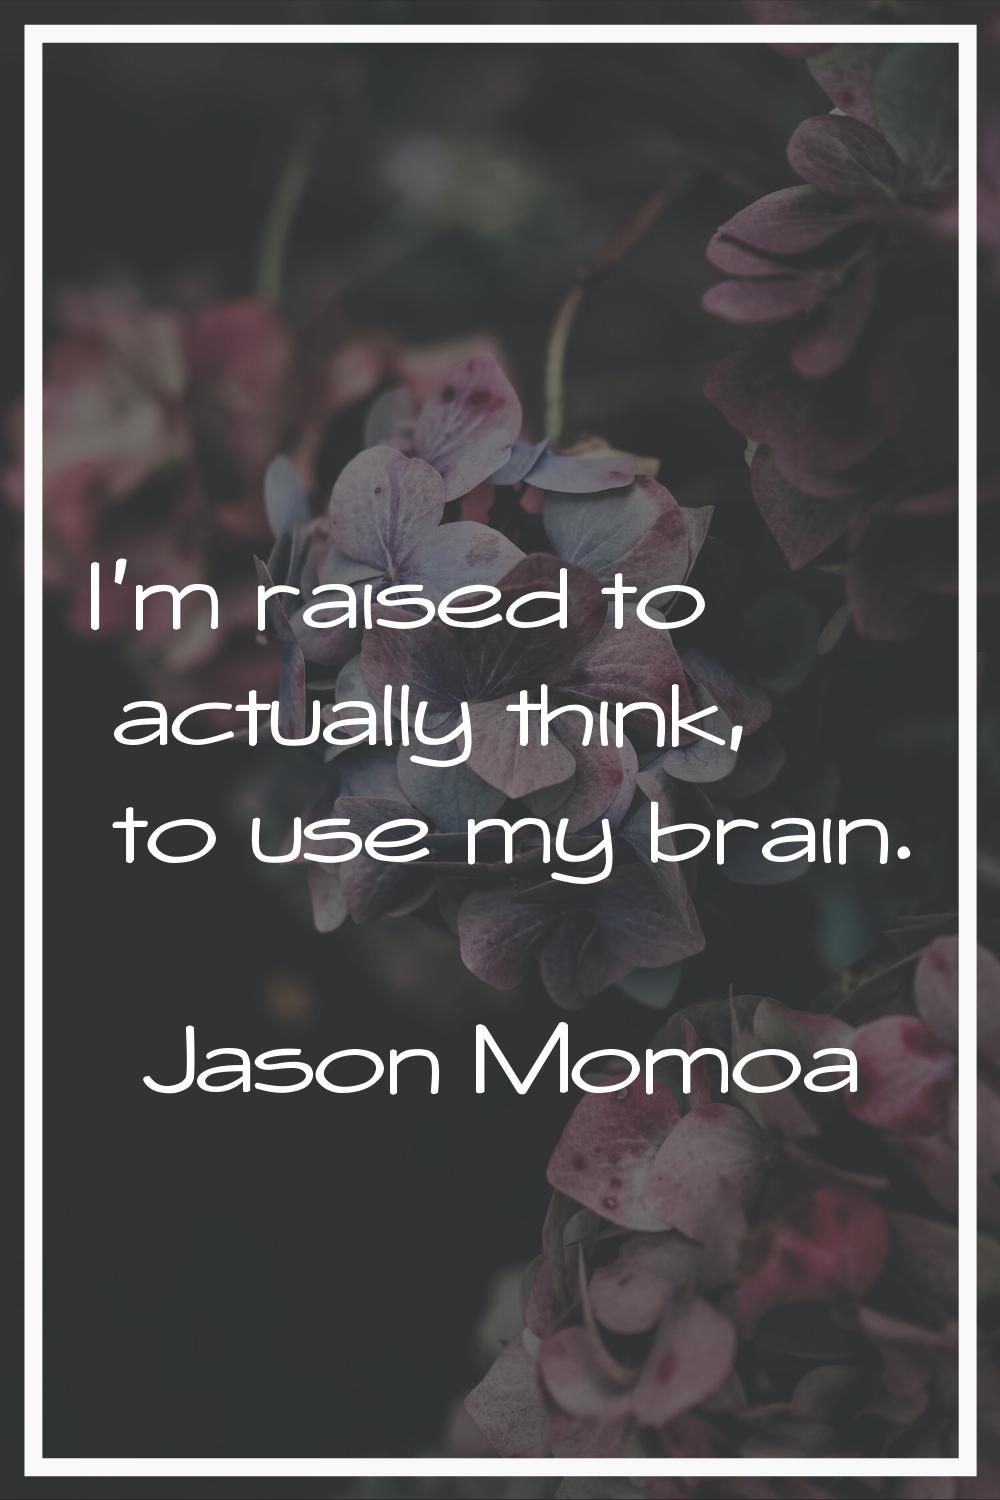 I'm raised to actually think, to use my brain.